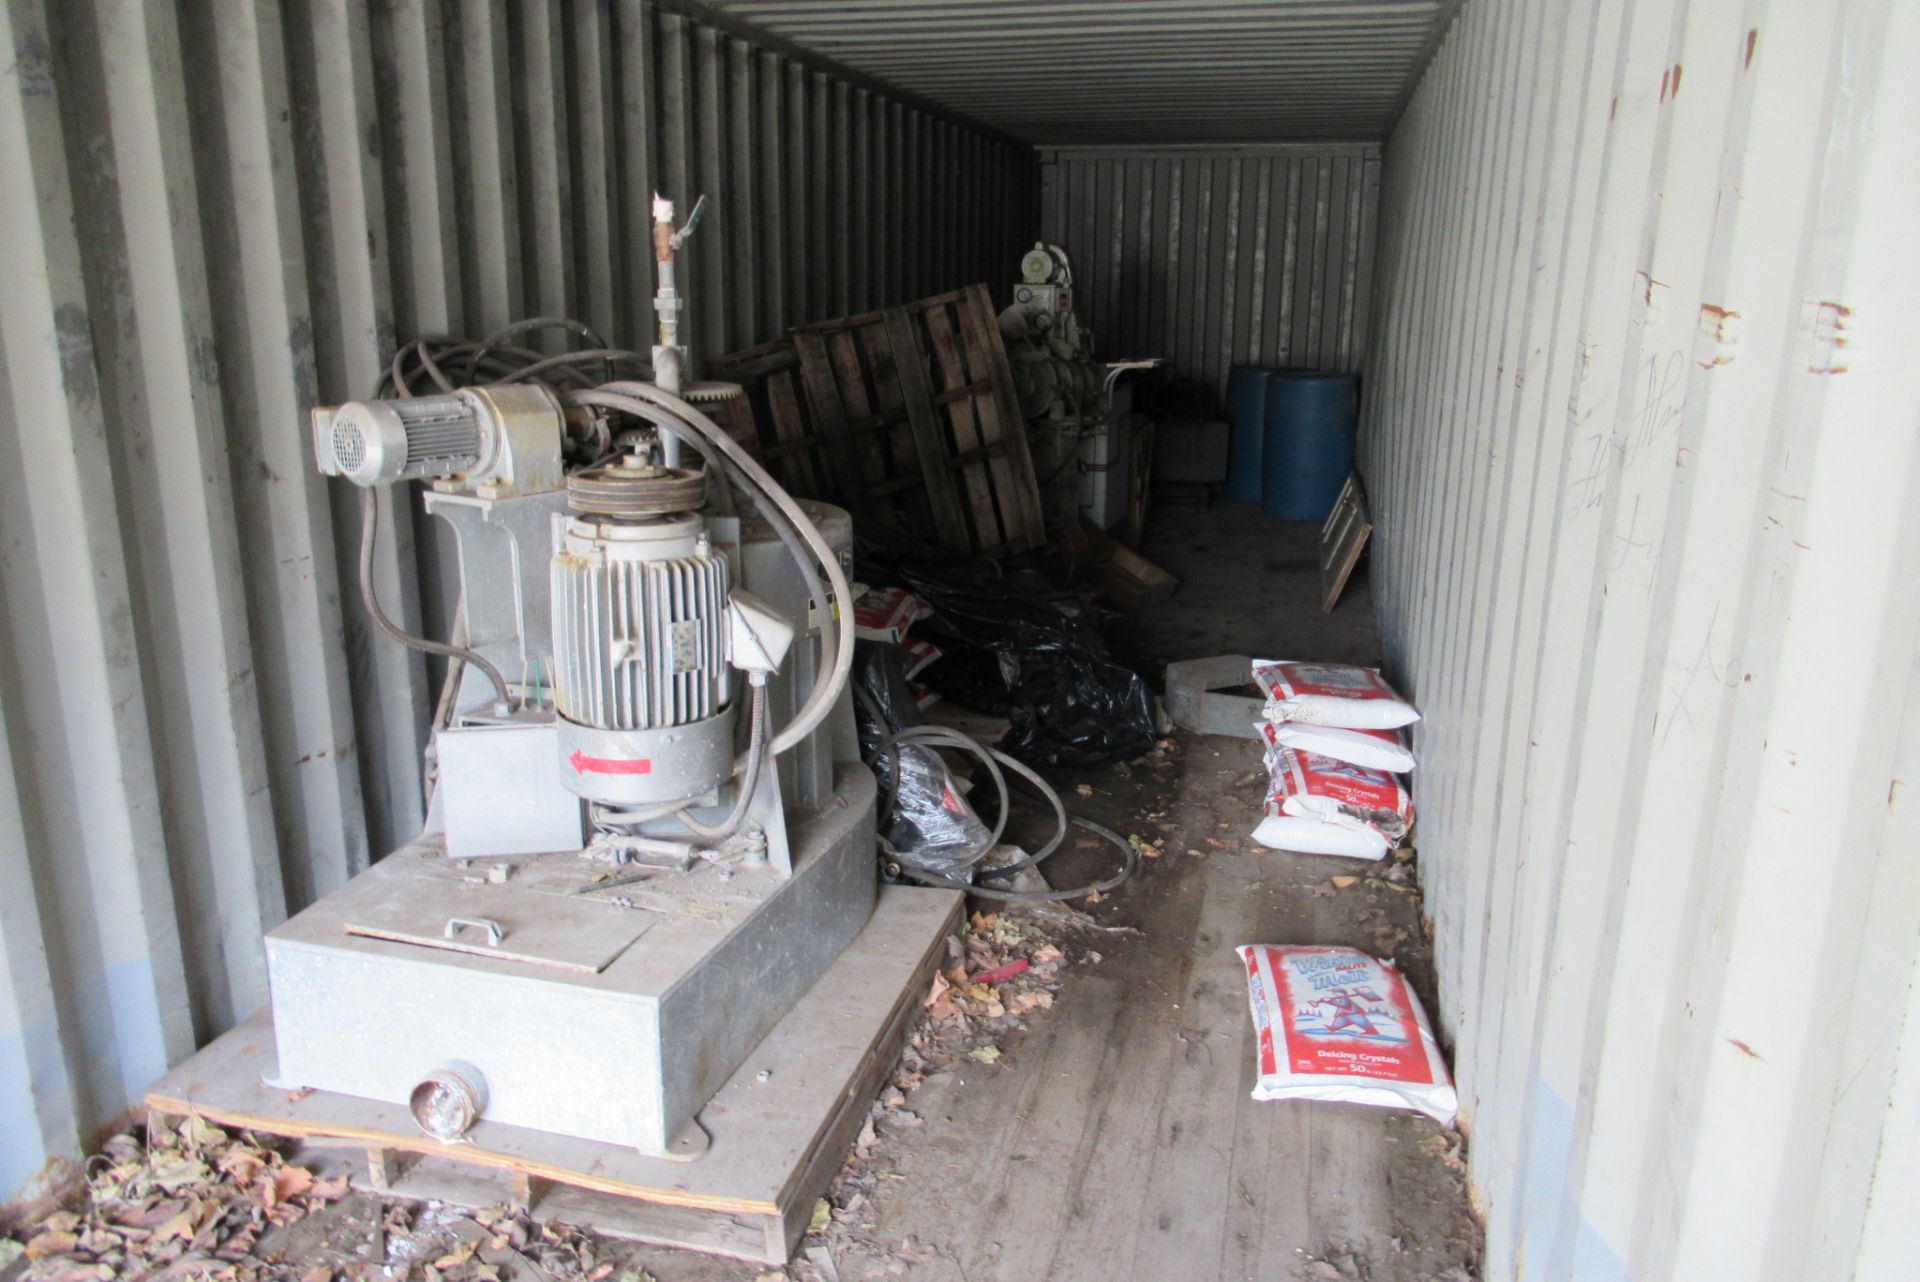 1985 40' Steel Shipping Container w/Contents - Image 6 of 7